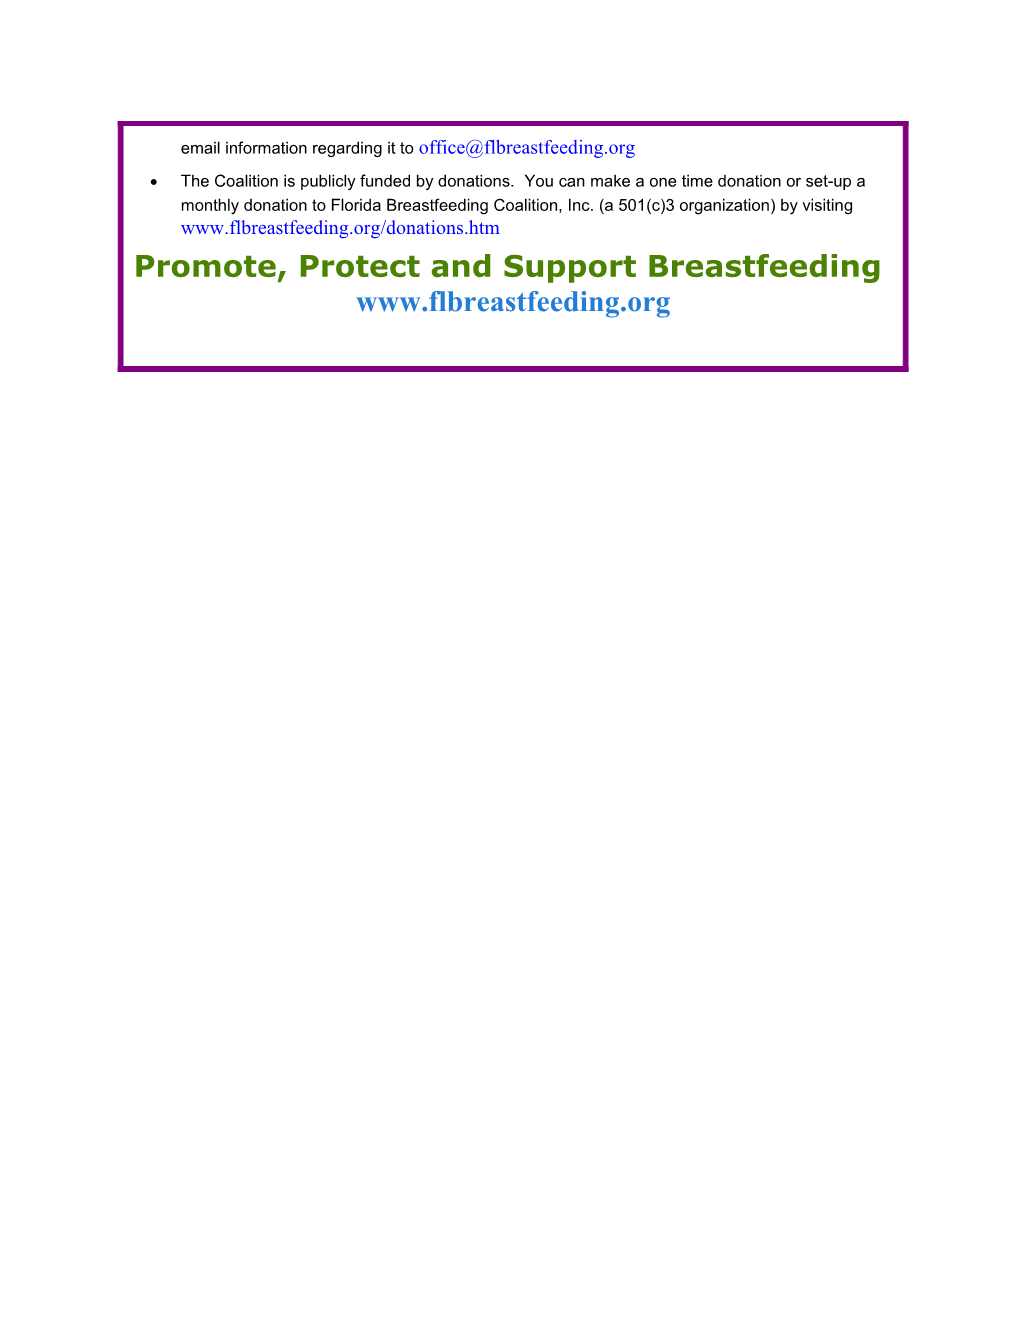 Implementing Business Case for Breastfeeding